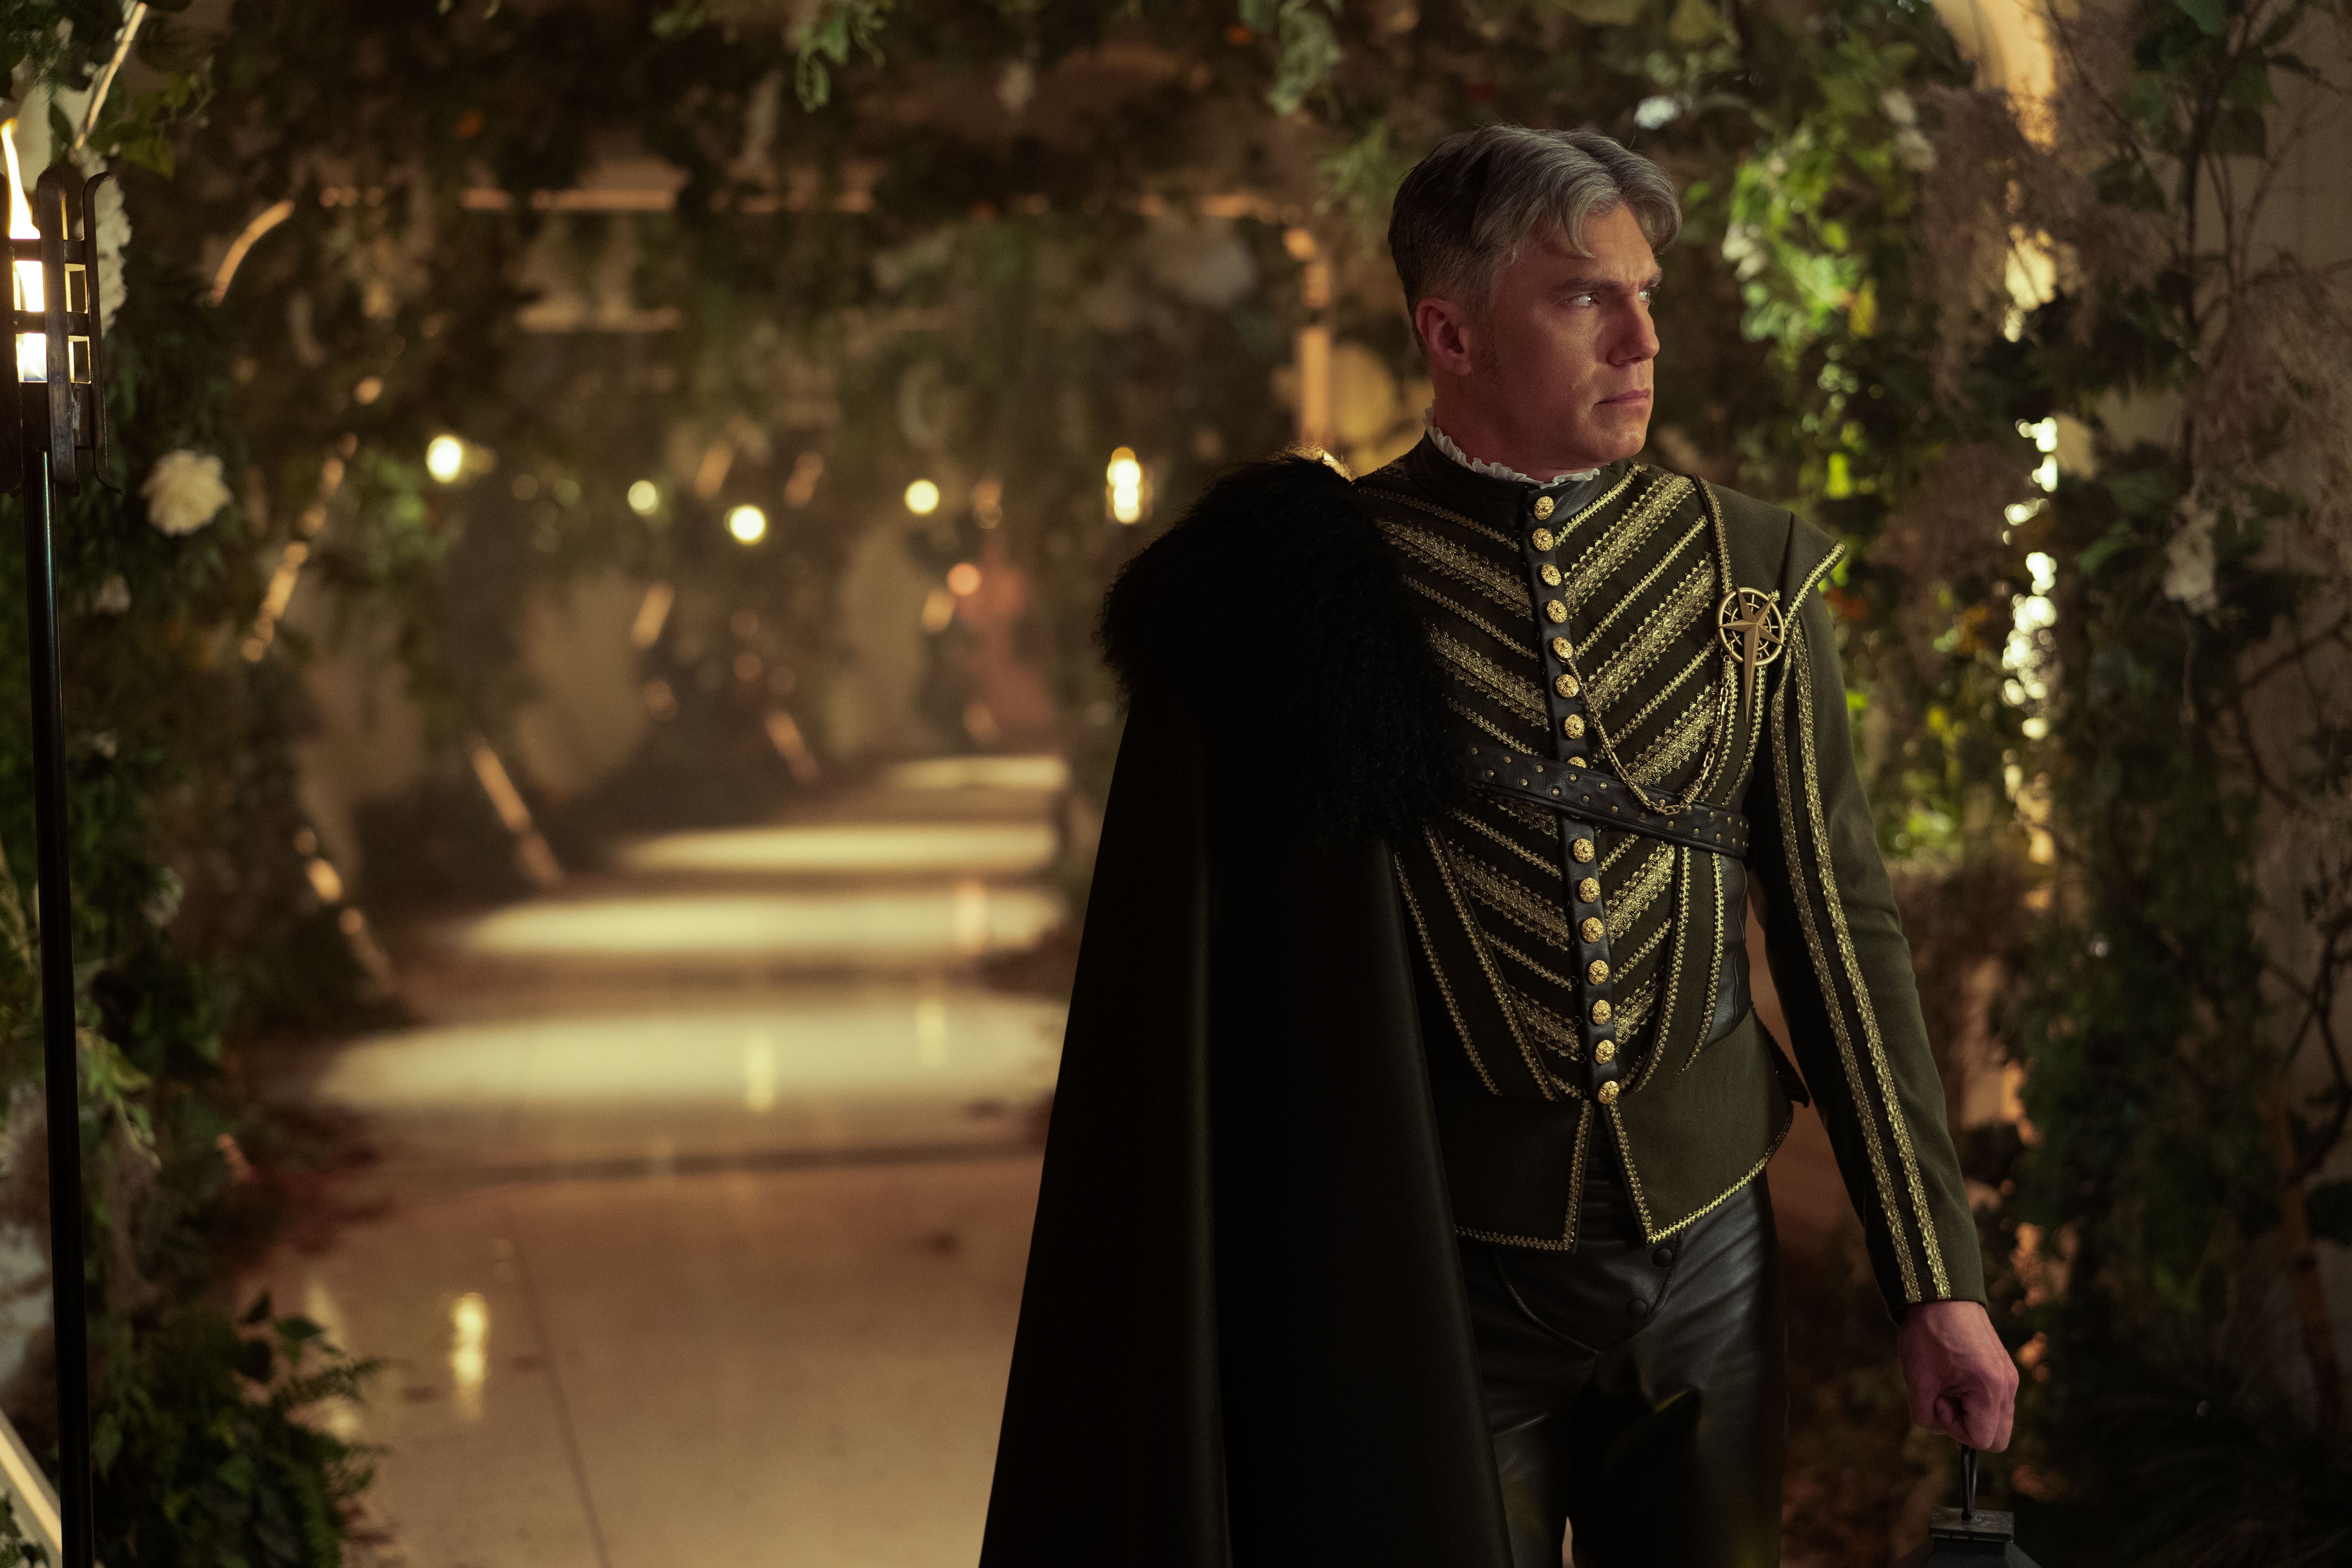 Anson Mount as Pike of the Paramount+ original series STAR TREK: STRANGE NEW WORLDS. Photo Cr: Marni Grossman/Paramount+ ©2022 ViacomCBS. All Rights Reserved.